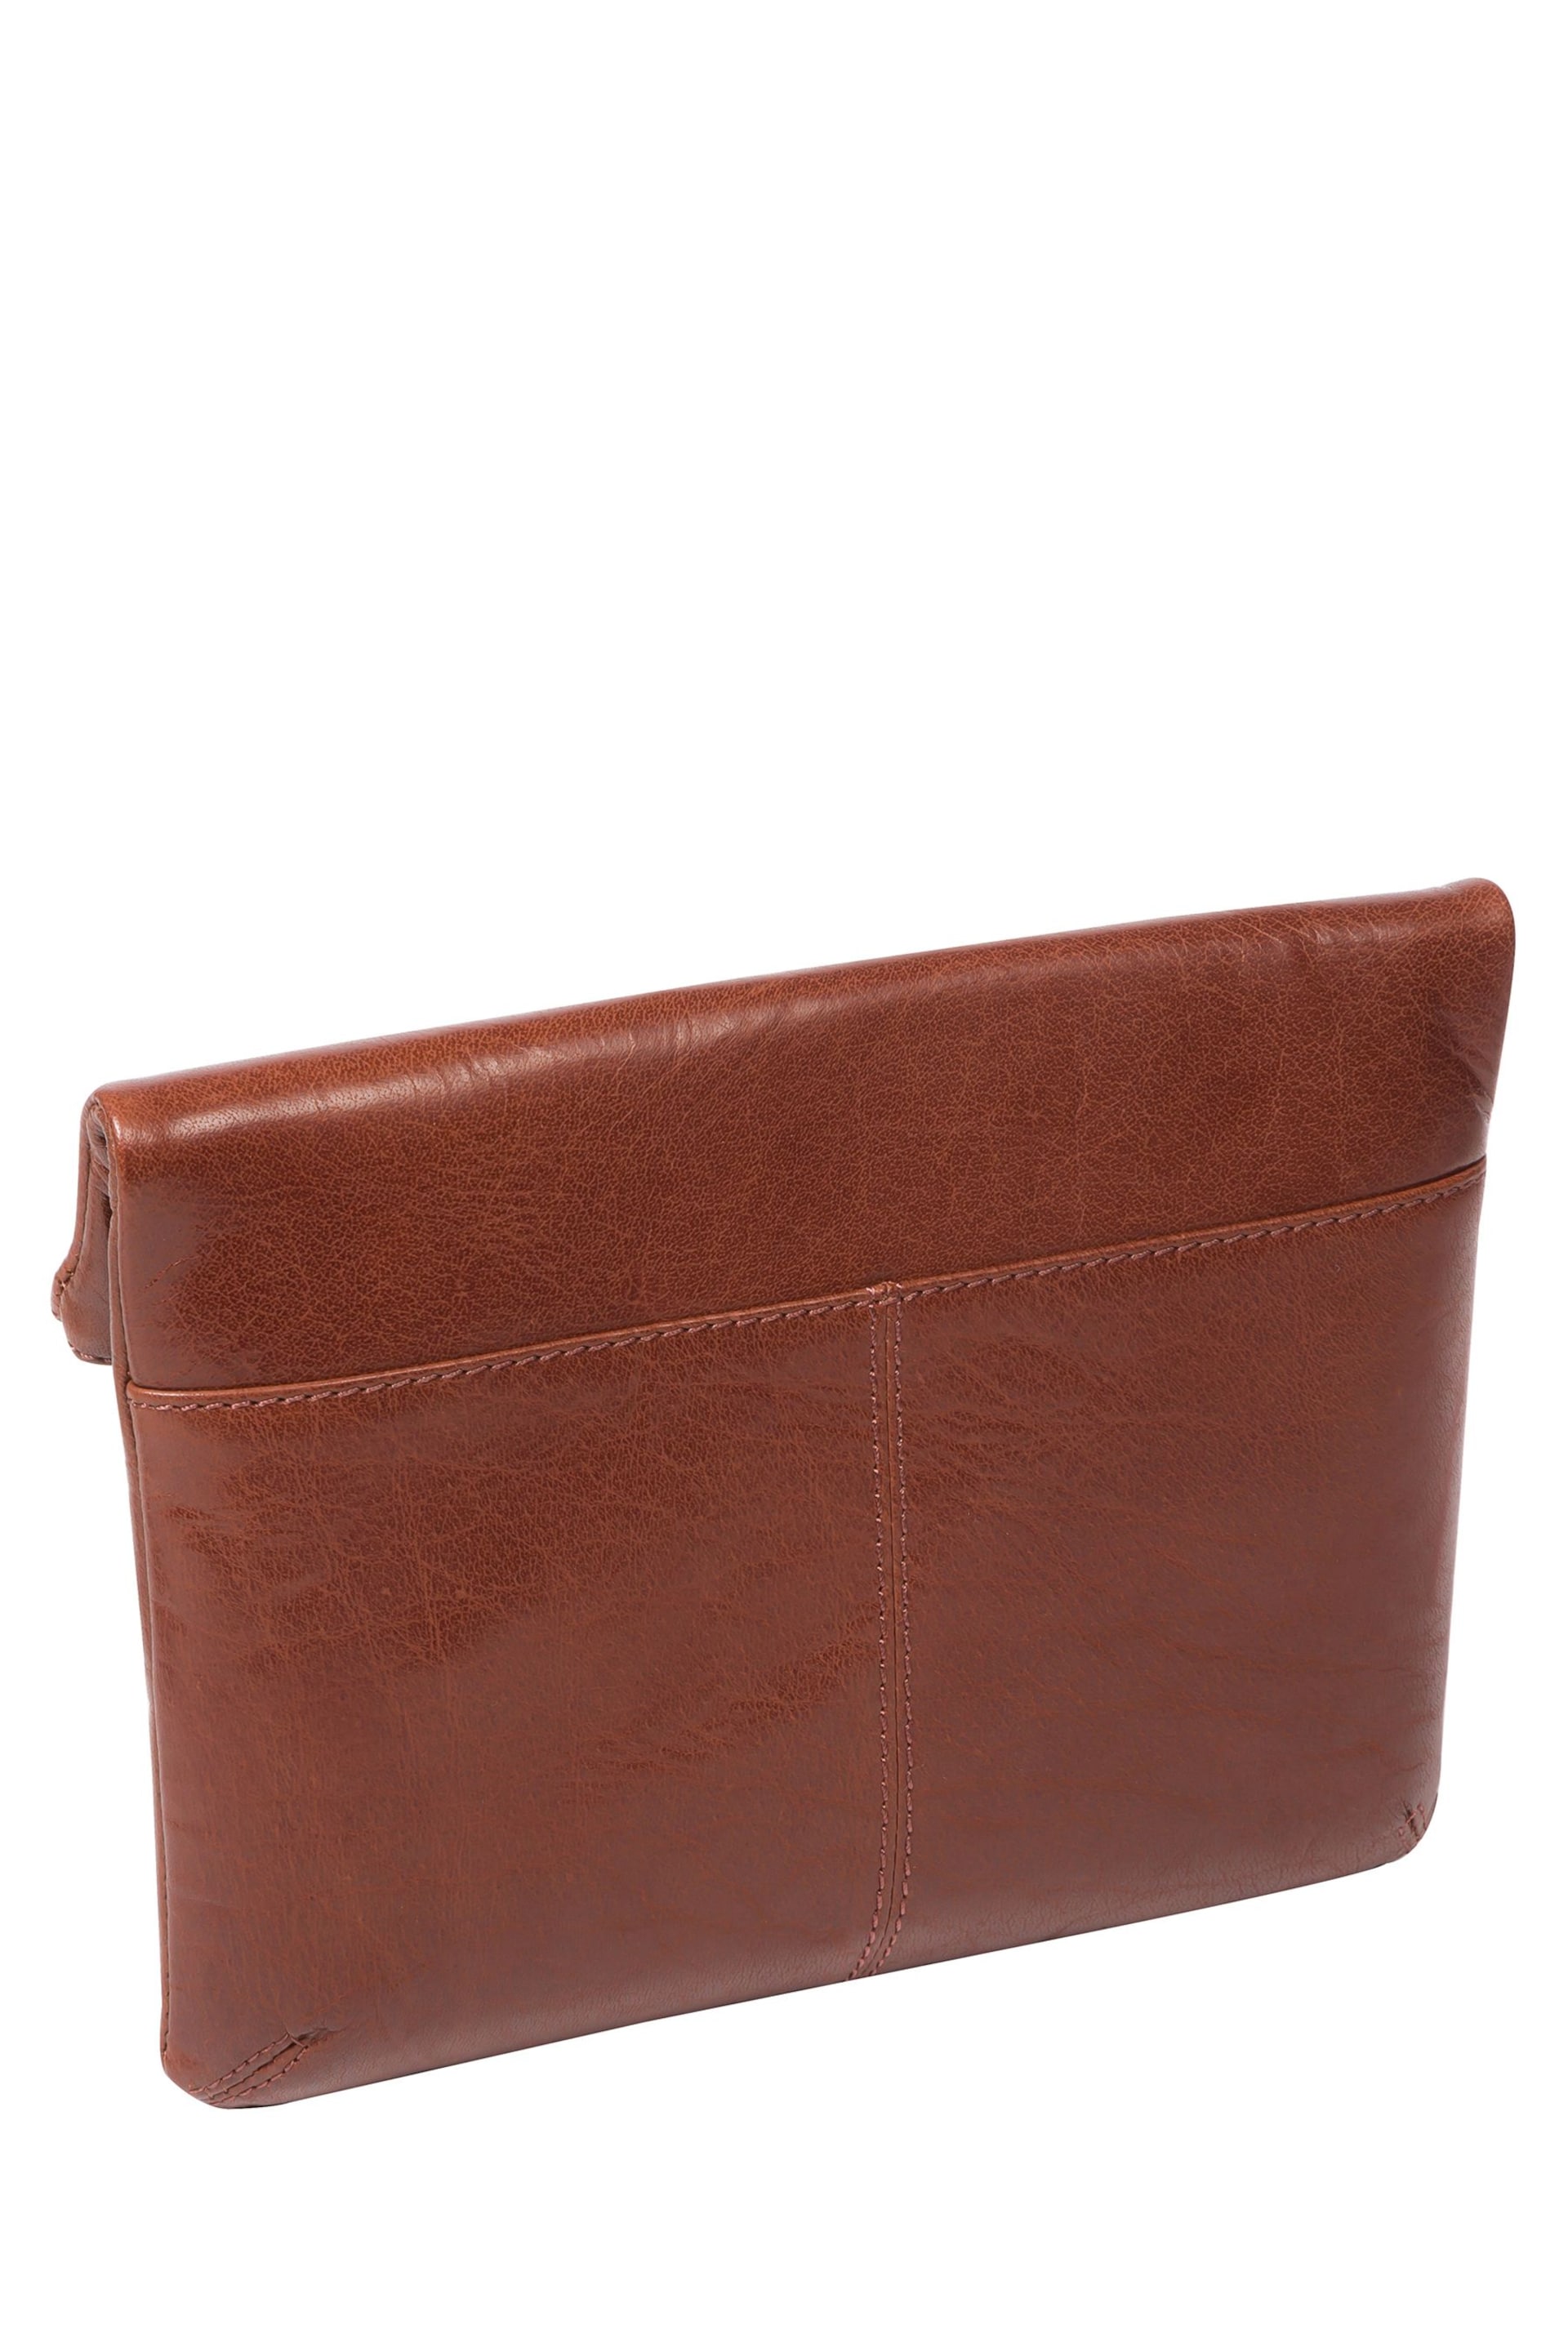 Conkca Flare Leather Clutch Bag - Image 3 of 4